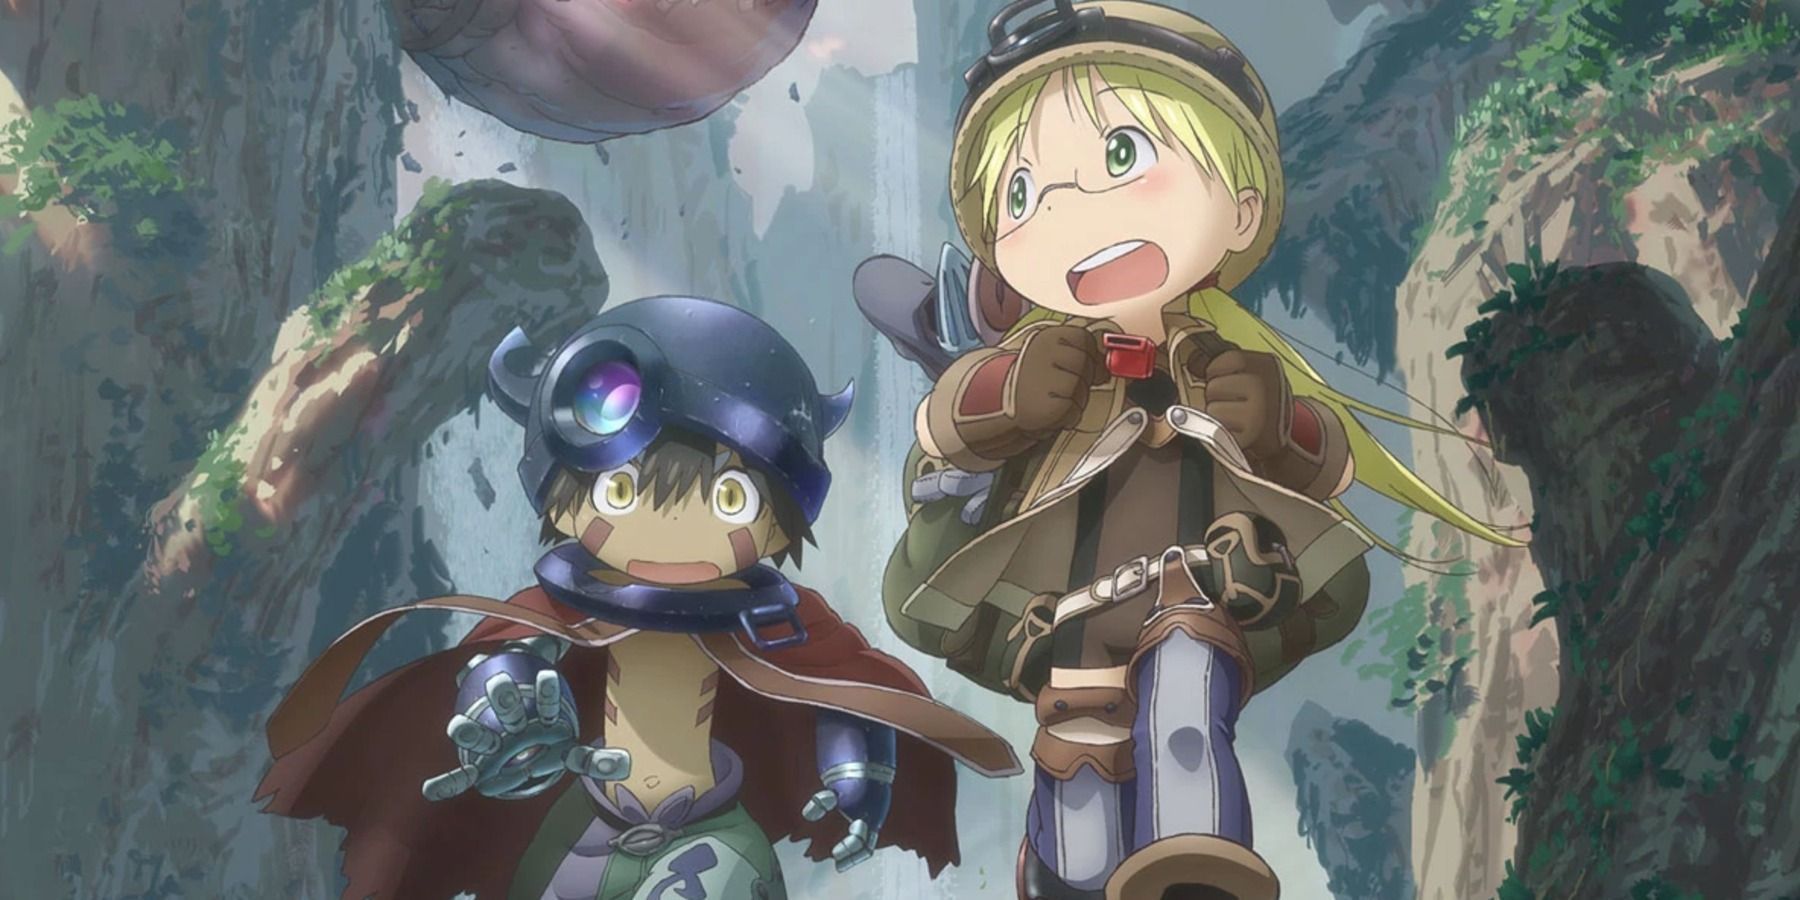 The main characters Reg and Riko, respectively from Made in Abyss.